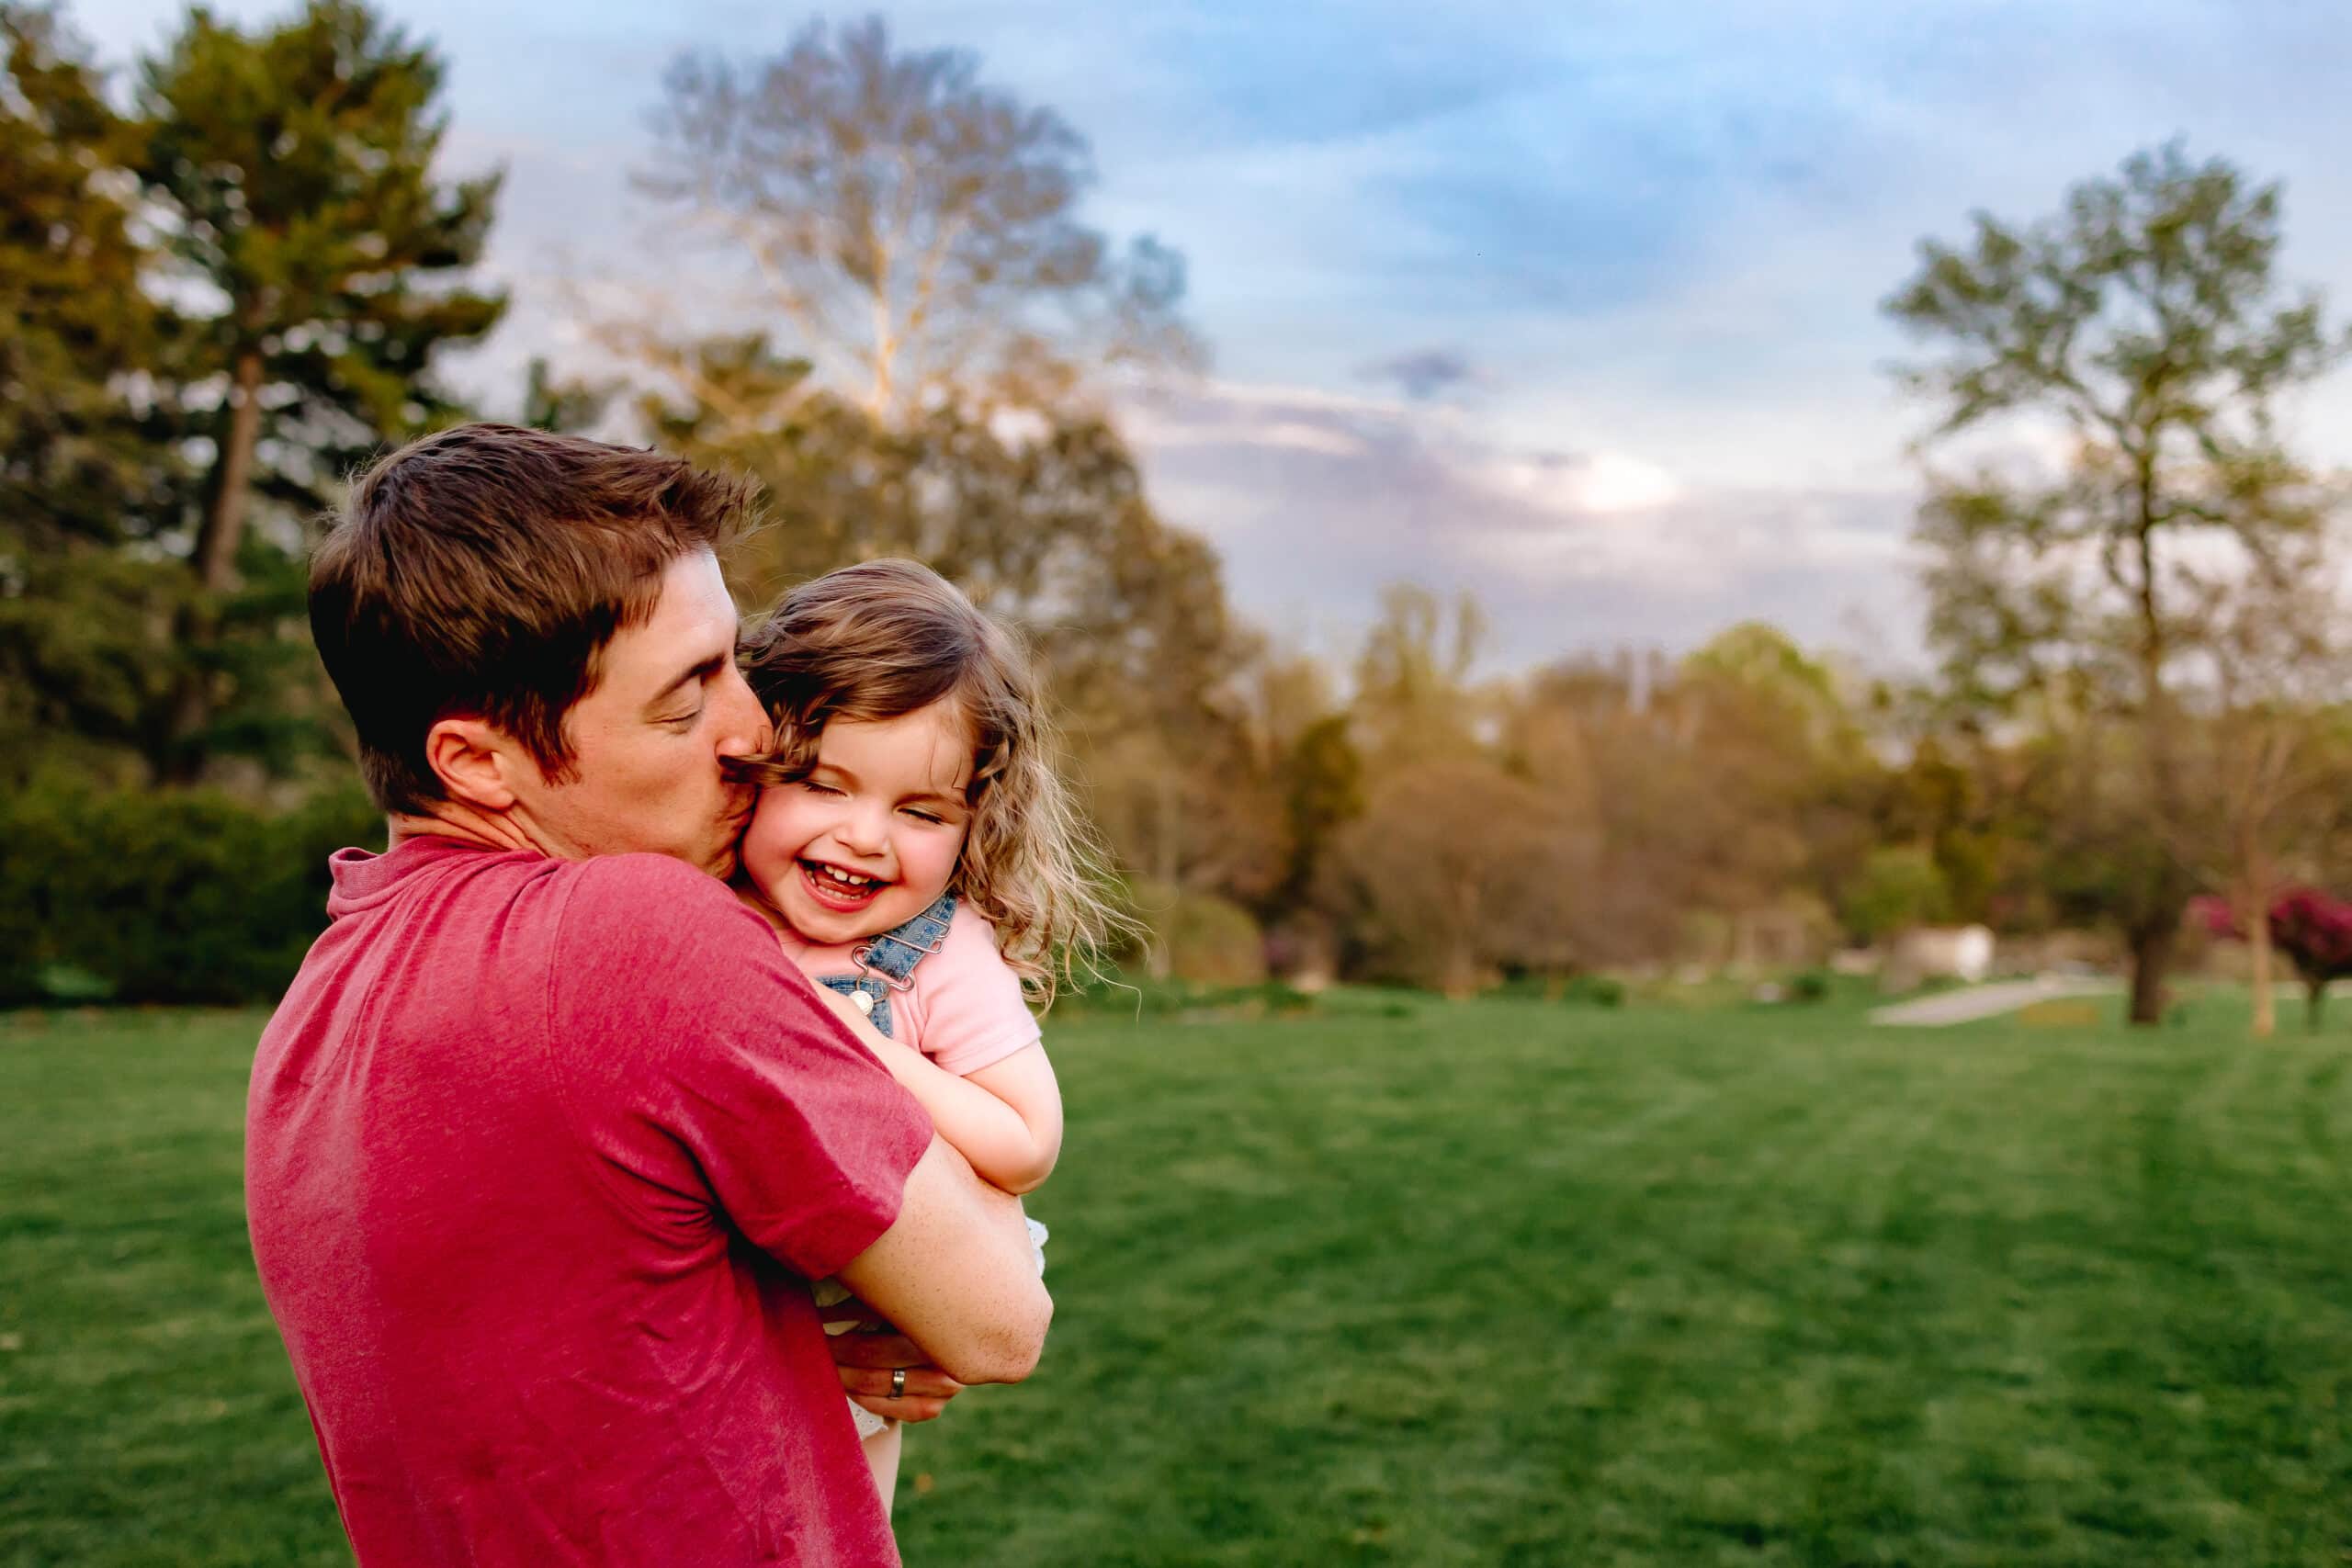 Dad hugging toddler in grassy field and giving her a kiss.